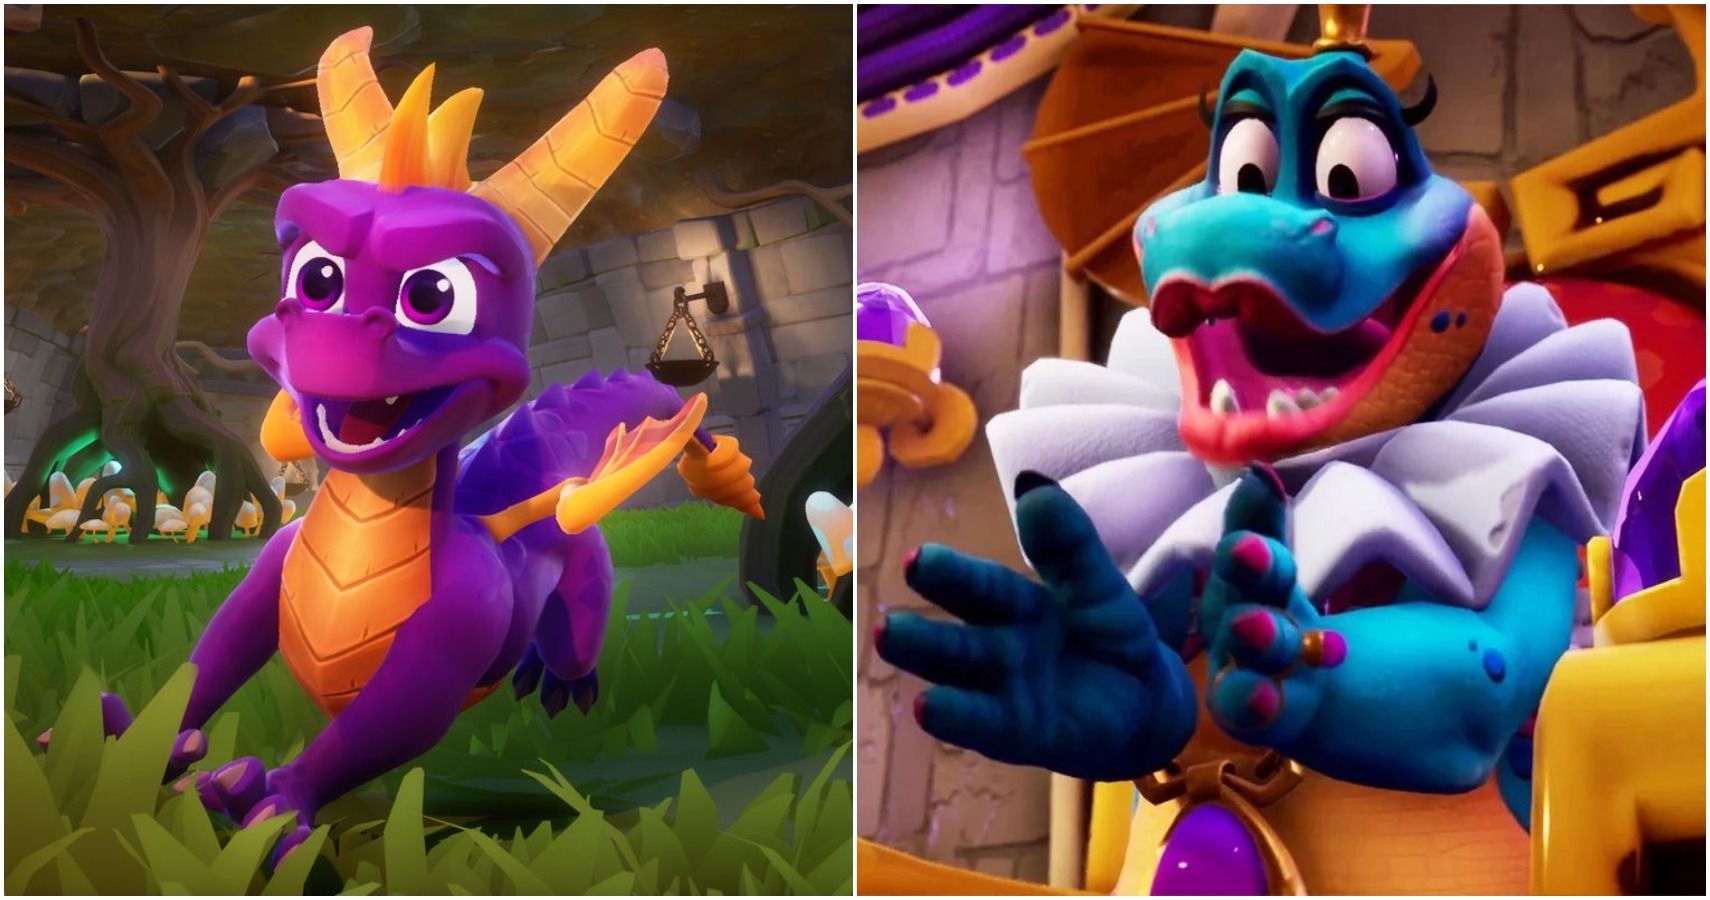 Spyro: All Boss In The Original Trilogy, Ranked